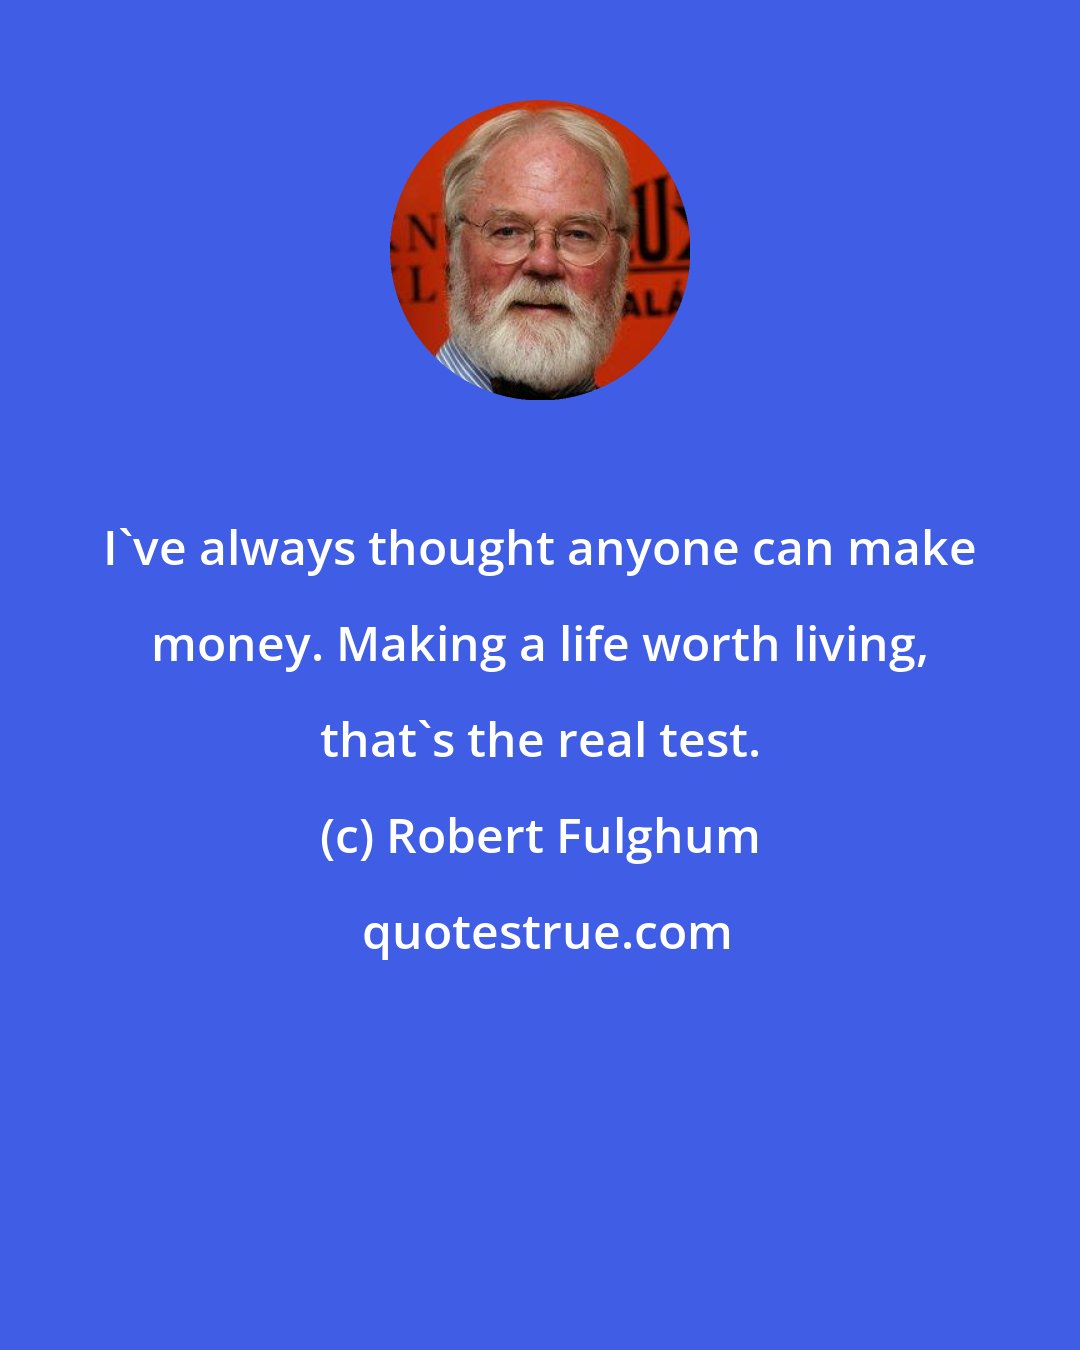 Robert Fulghum: I've always thought anyone can make money. Making a life worth living, that's the real test.